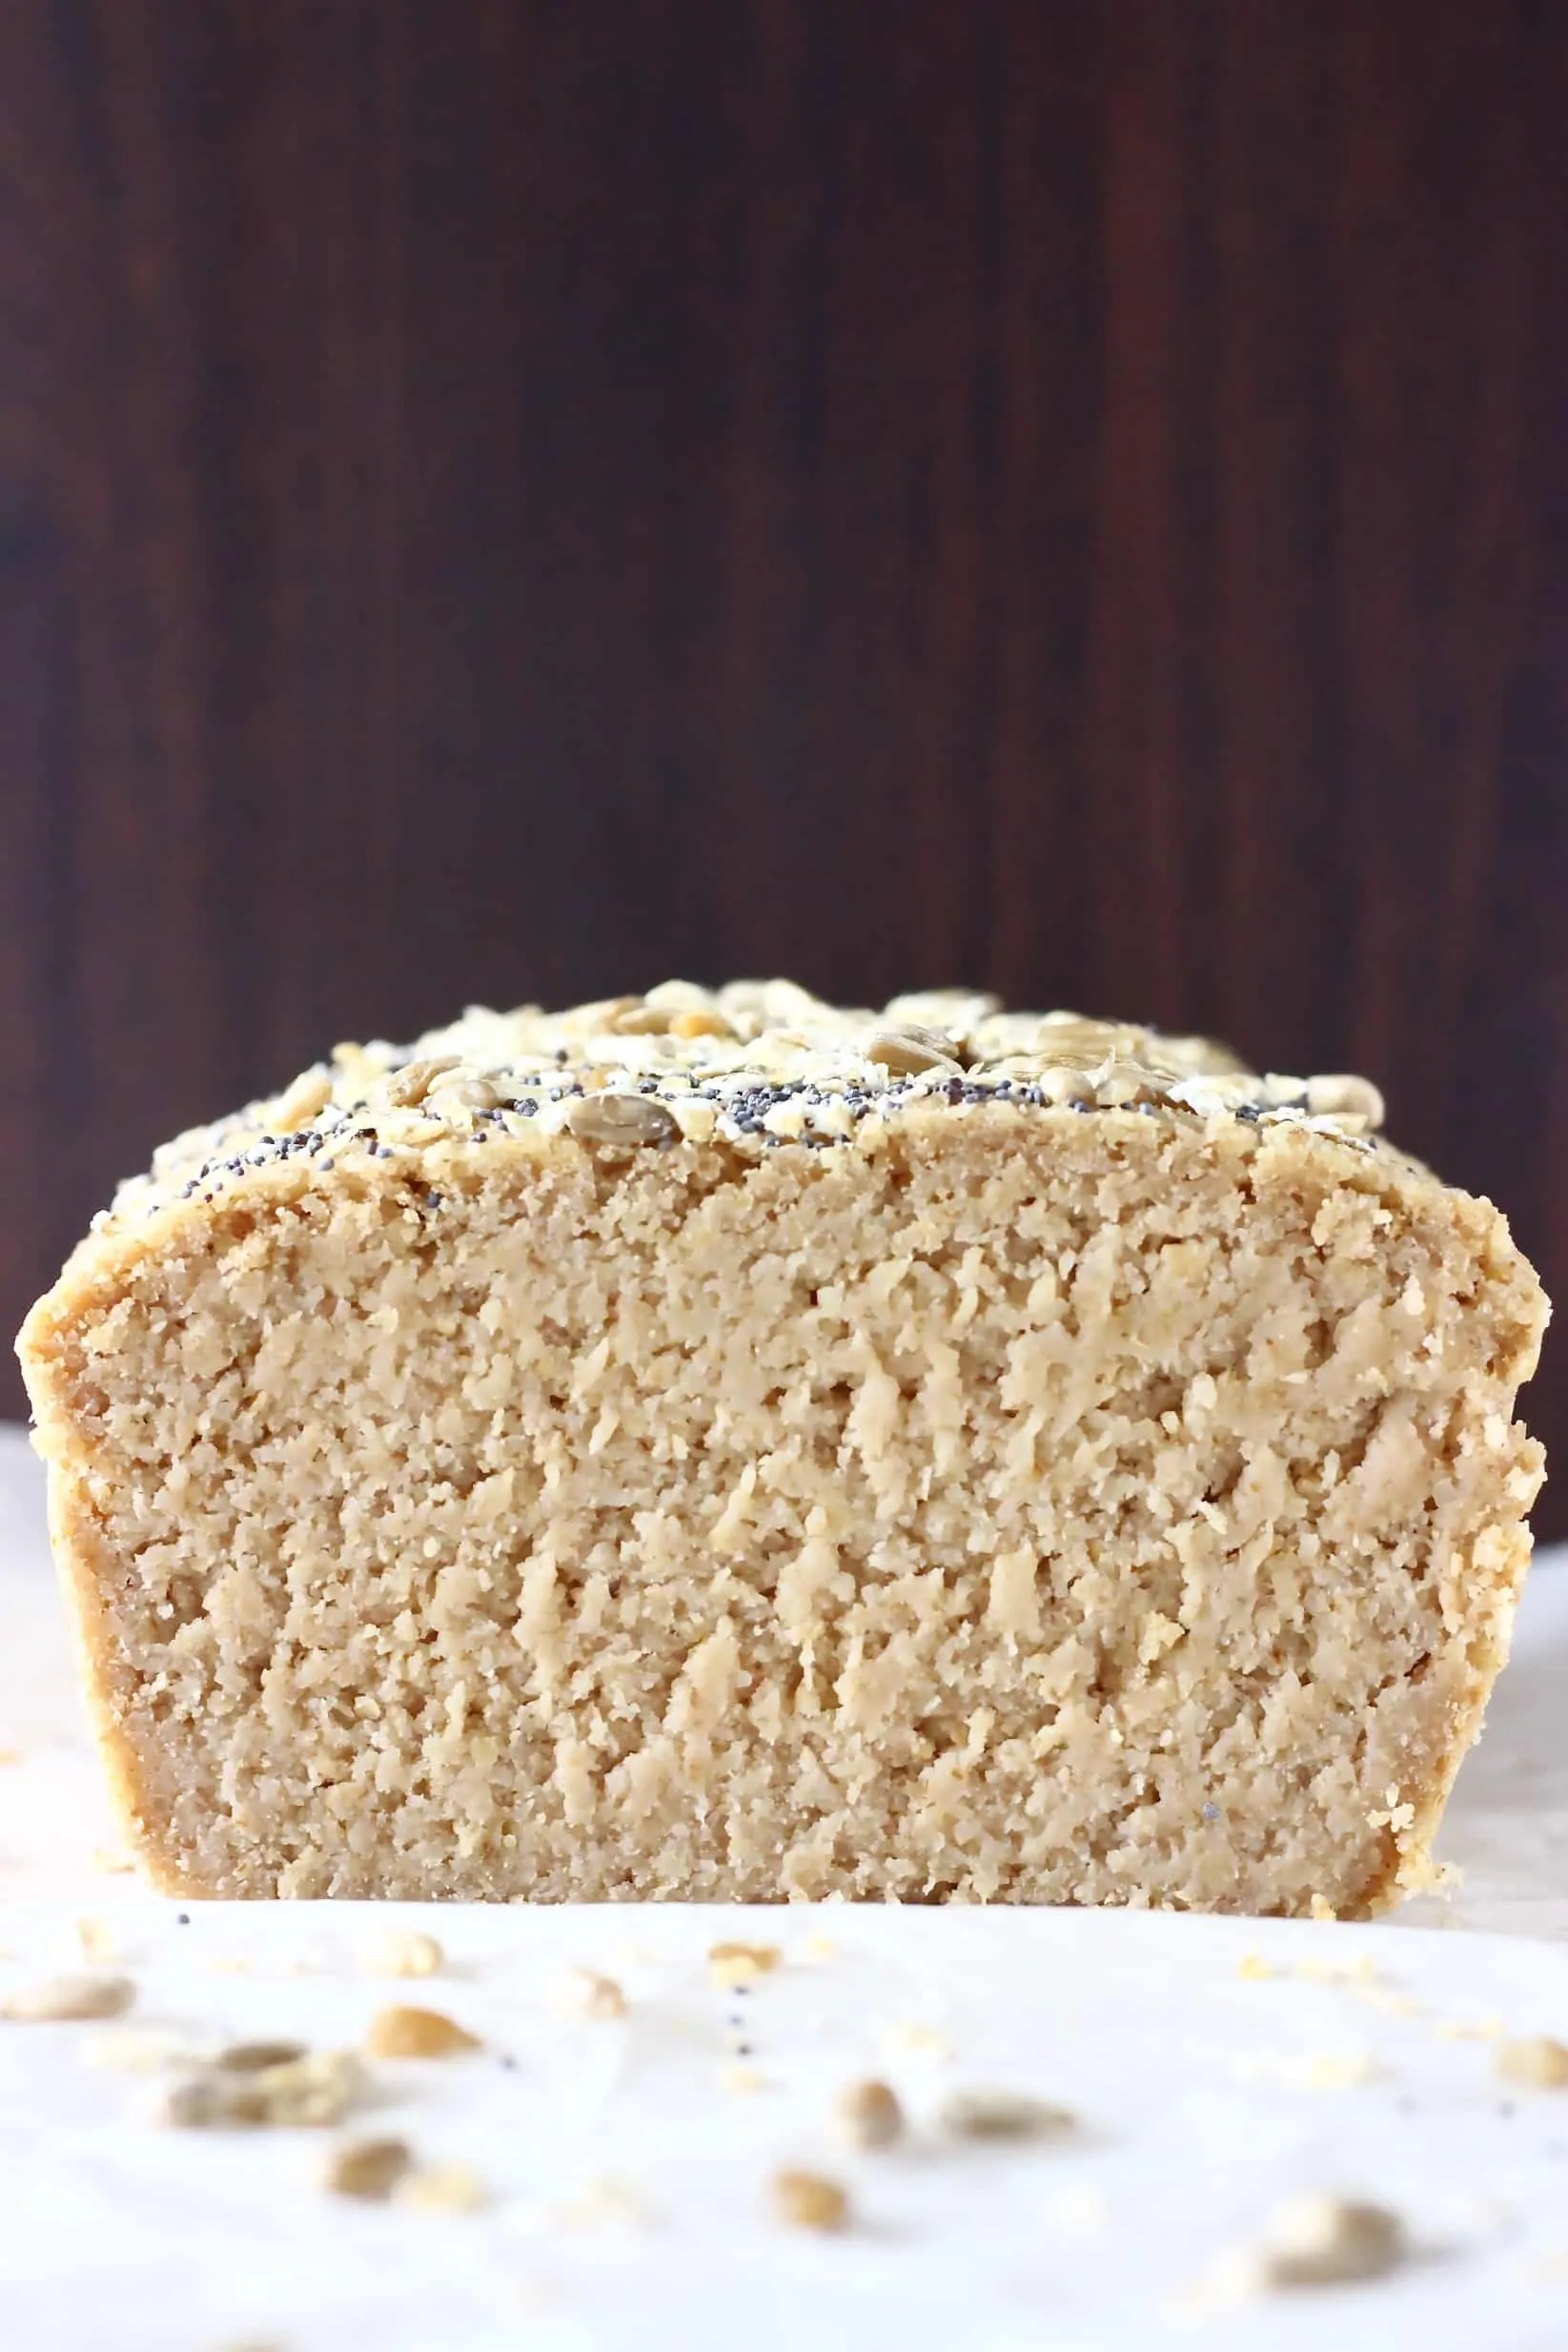 A sliced cross-section of a loaf of oat flour bread topped with oats and seeds